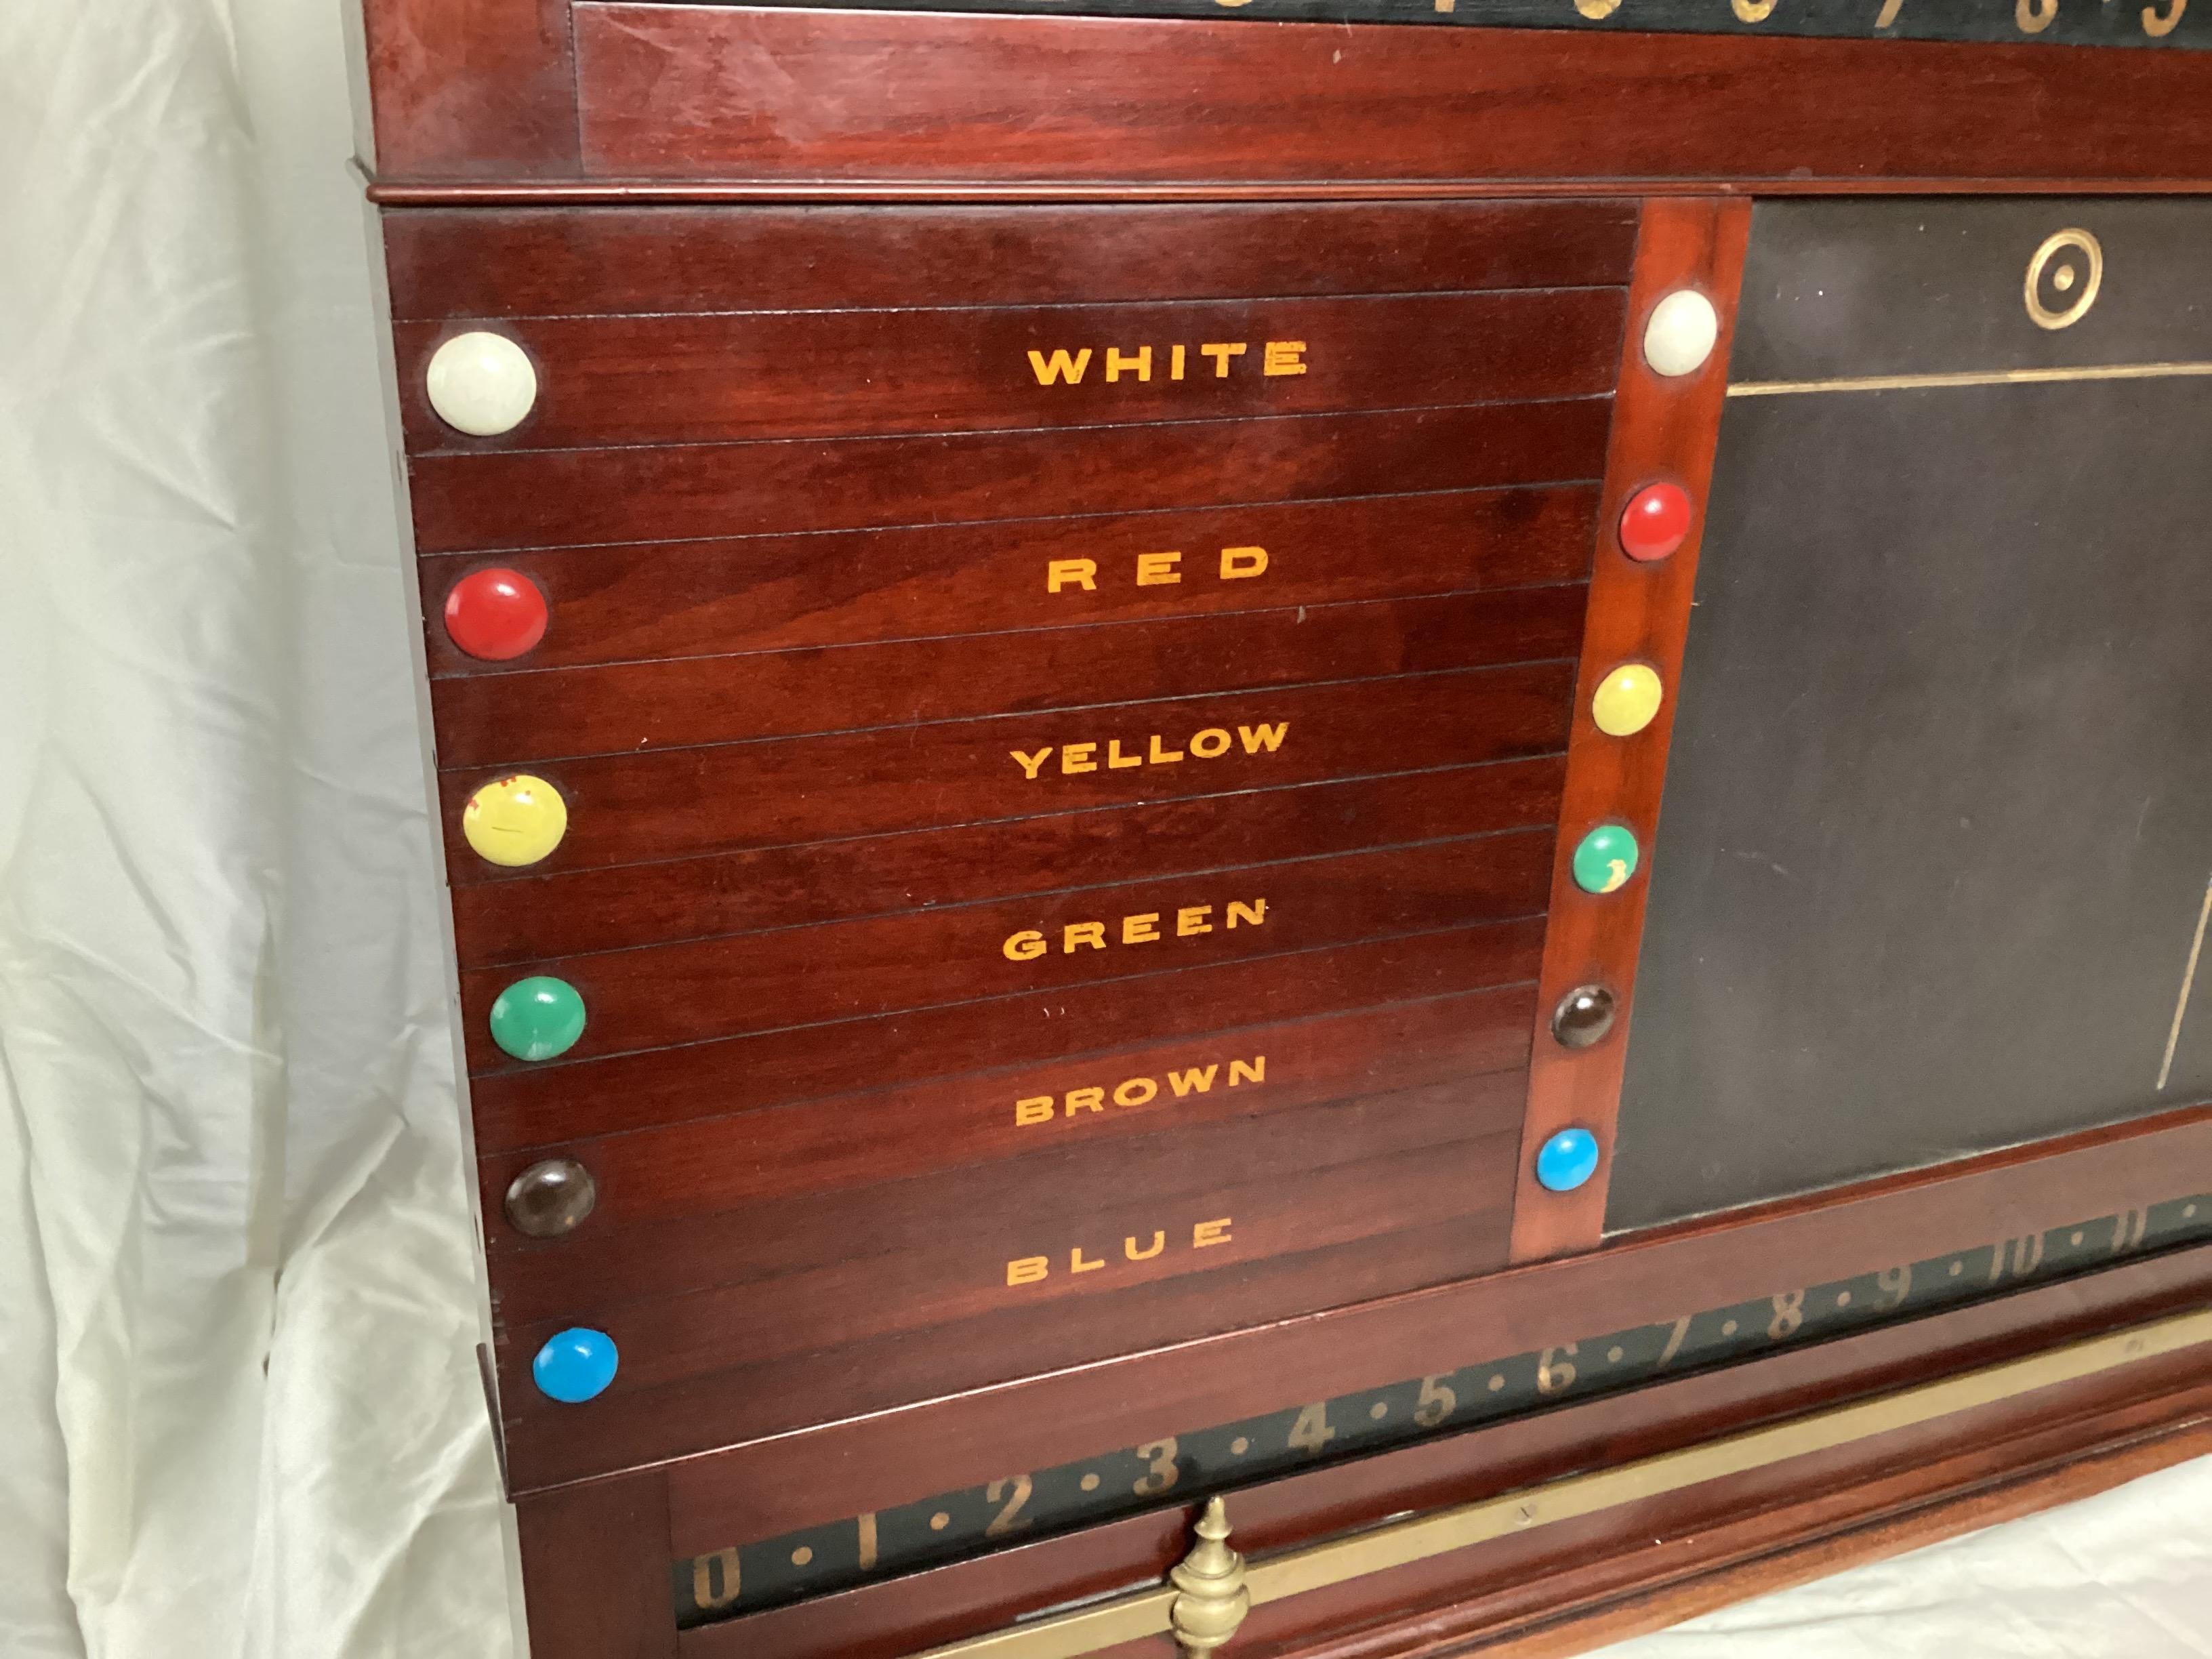 Antique Thurston & Co LTD London Snooker Billiards Scoreboard. This is a great example of English craftsmanship made of mahogany late Victorian. The slate is in wonderful condition. The case is in great condition with one small age Crack on the